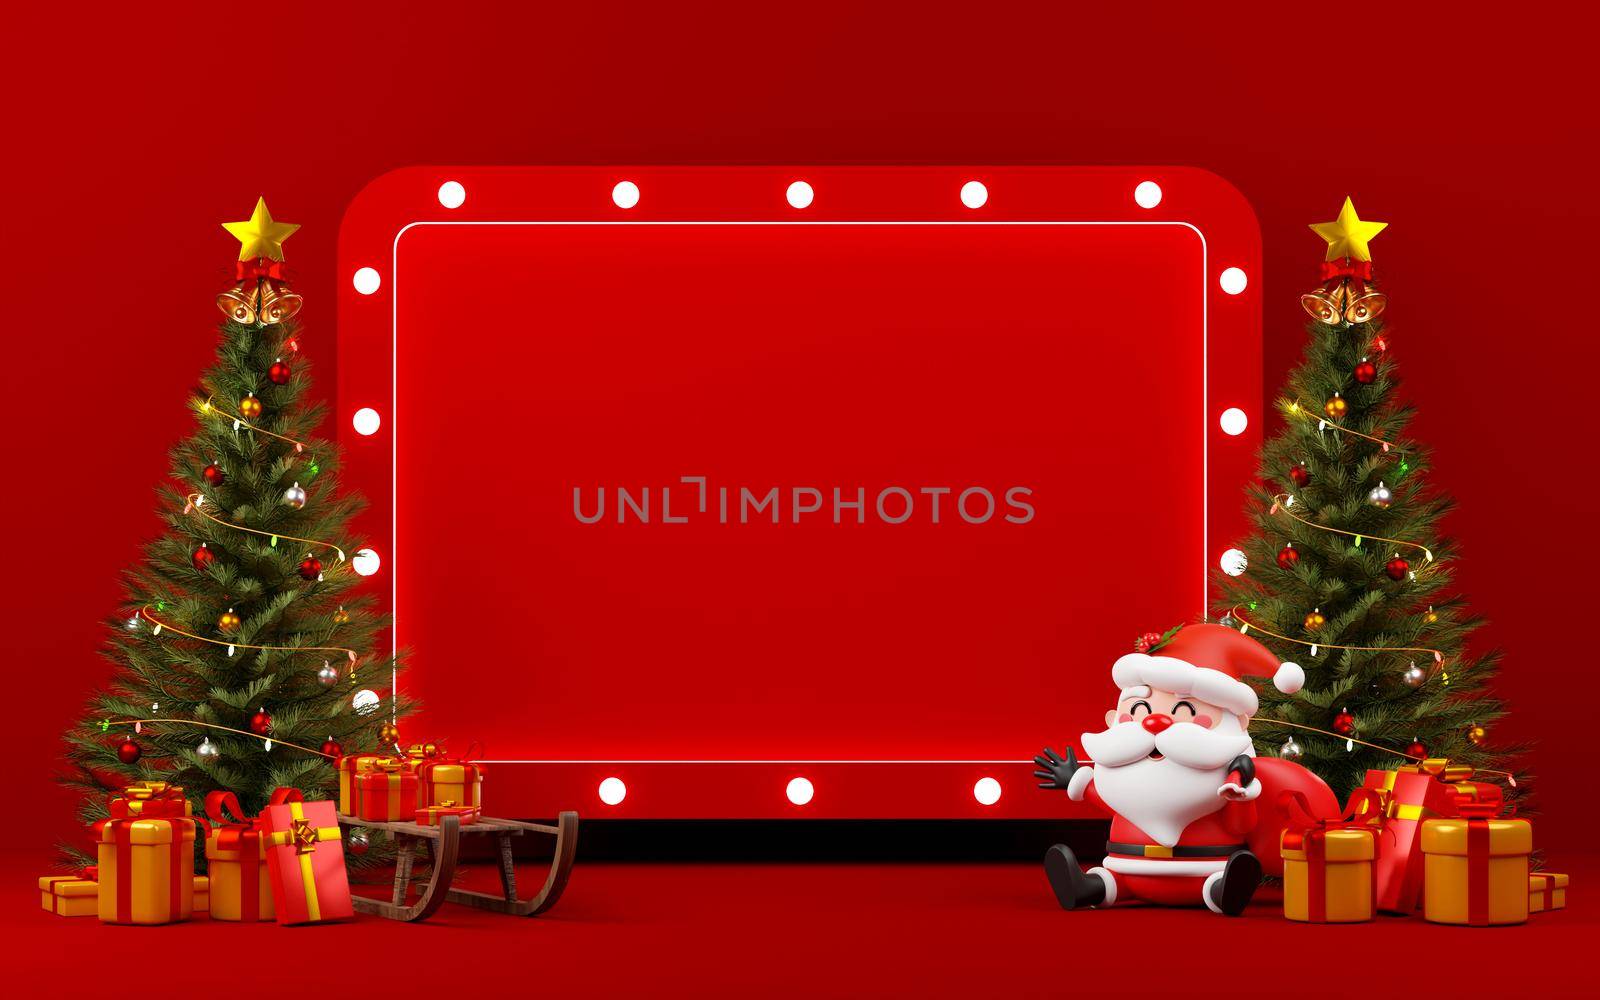 3d illustration of red billboard for advertisement with Christmas theme